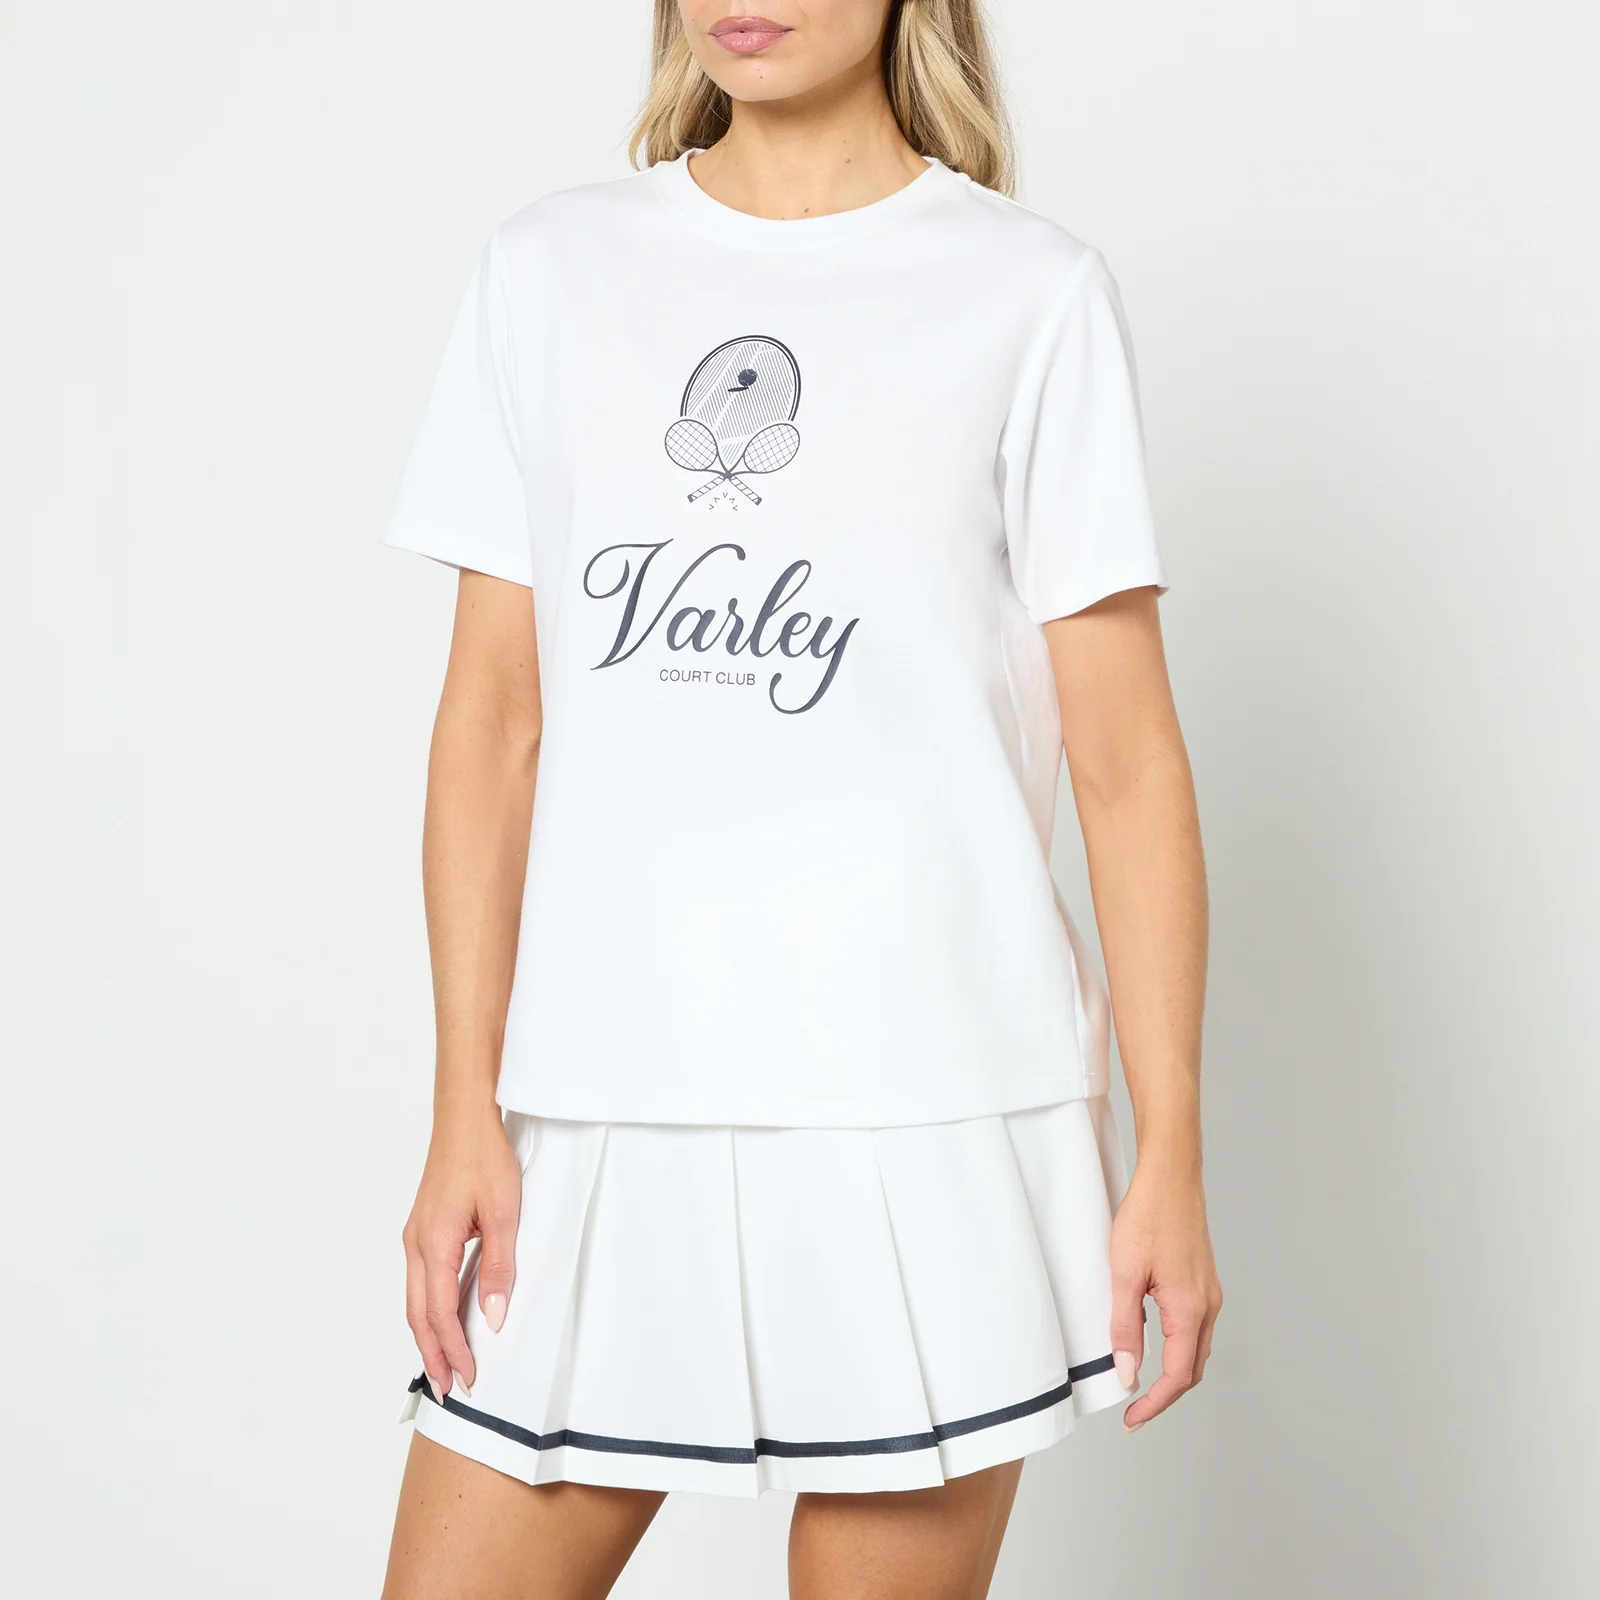 Varley Coventry Branded Jersey Tee Image 1